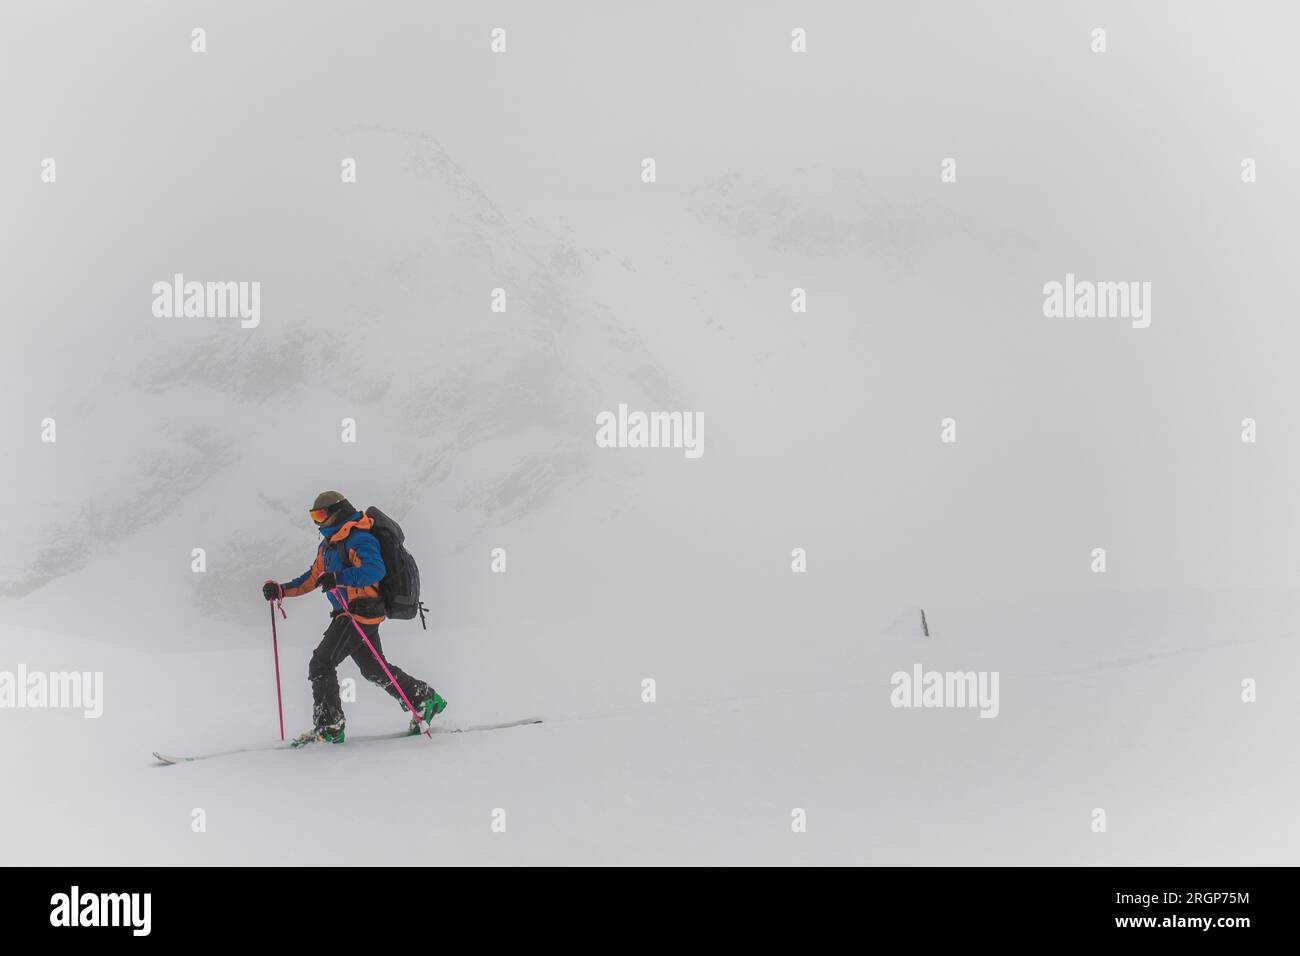 Man ski touring in white out conditions, poor visibility Stock Photo